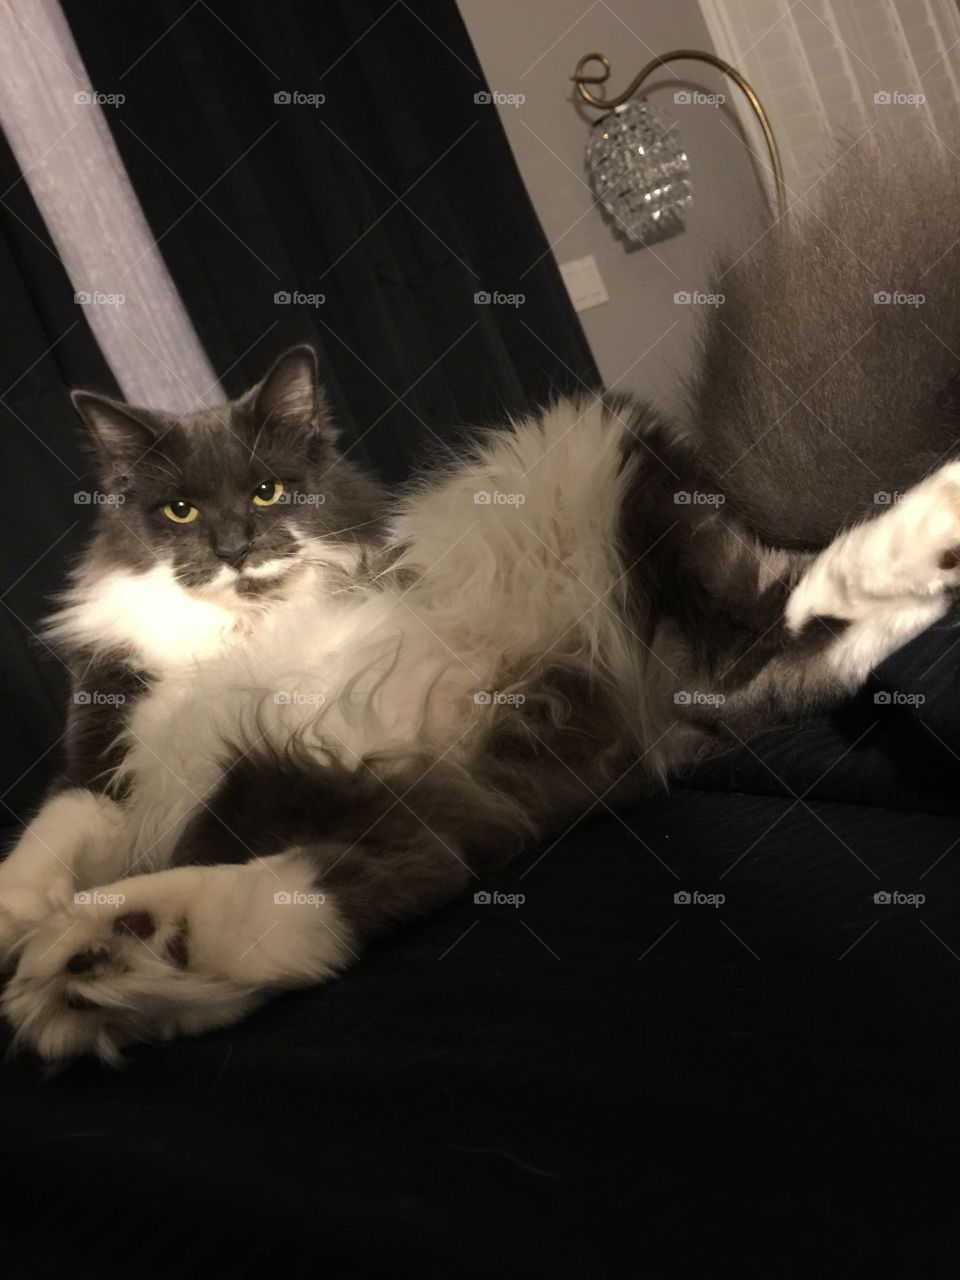 Gray & white Maine coon cat "playboy" posing